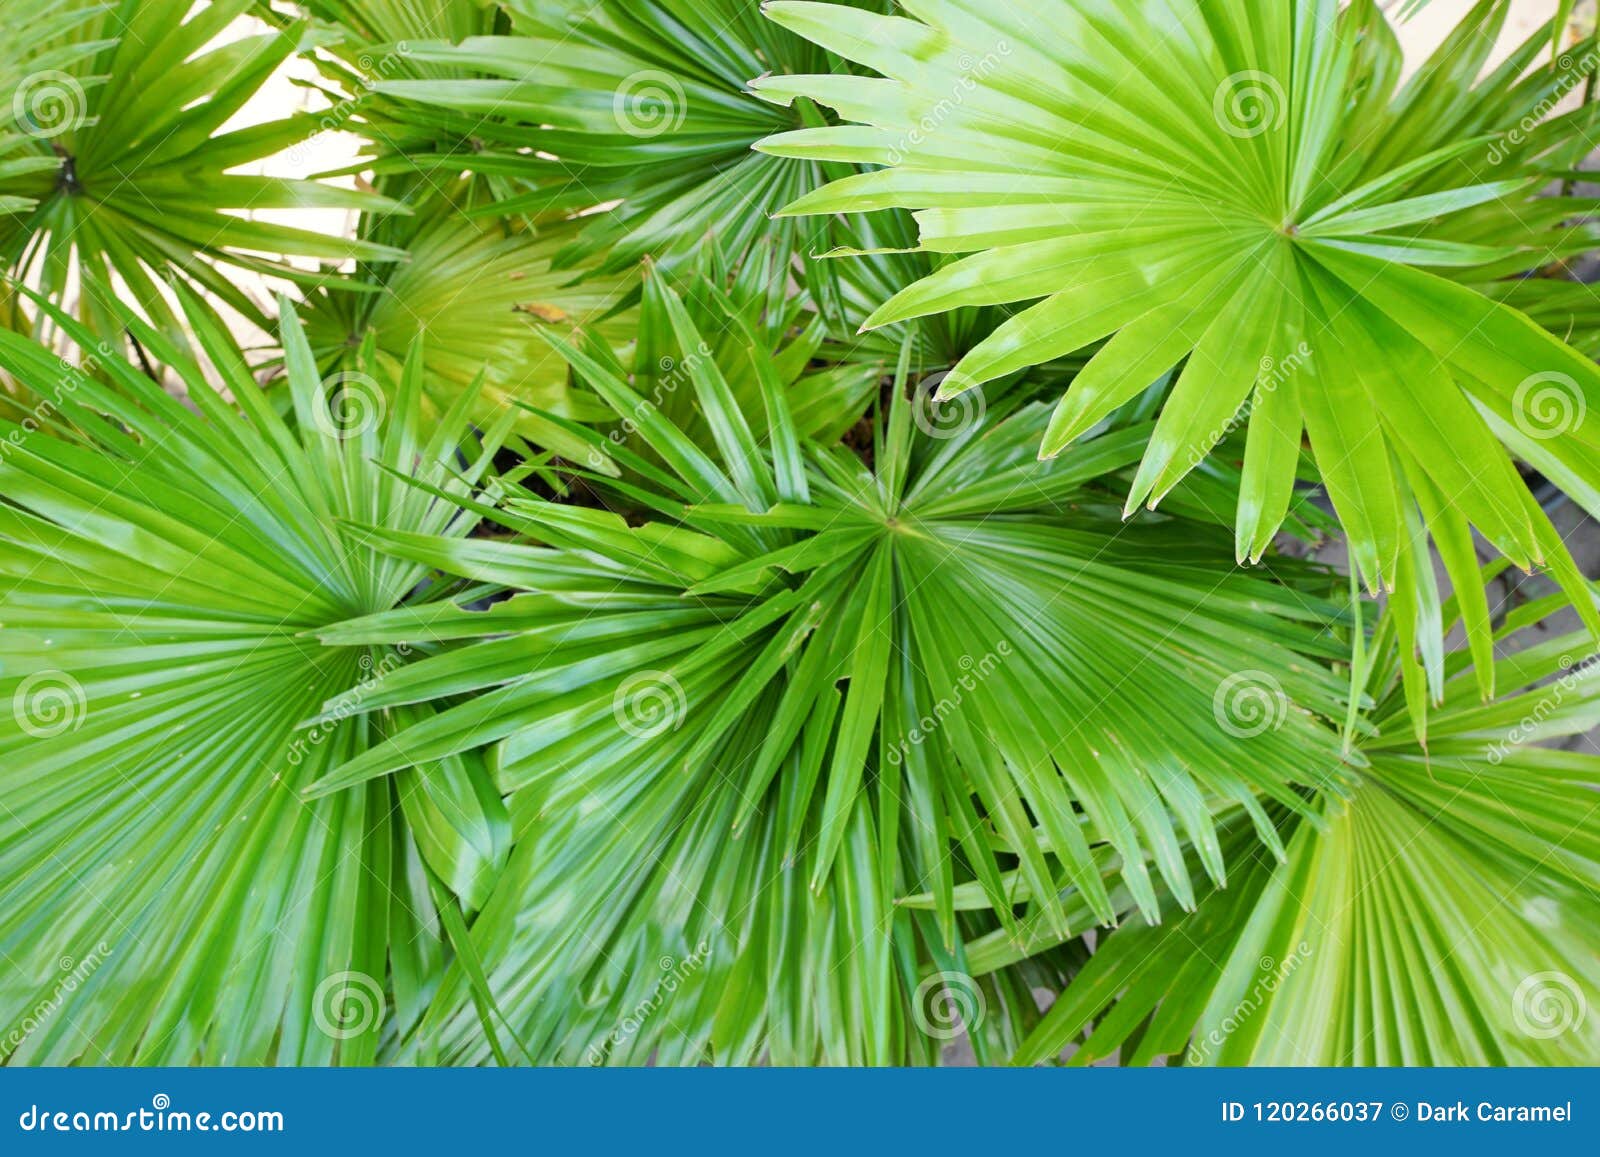 top view of leaves saw palmetto, abstract leaves texture.